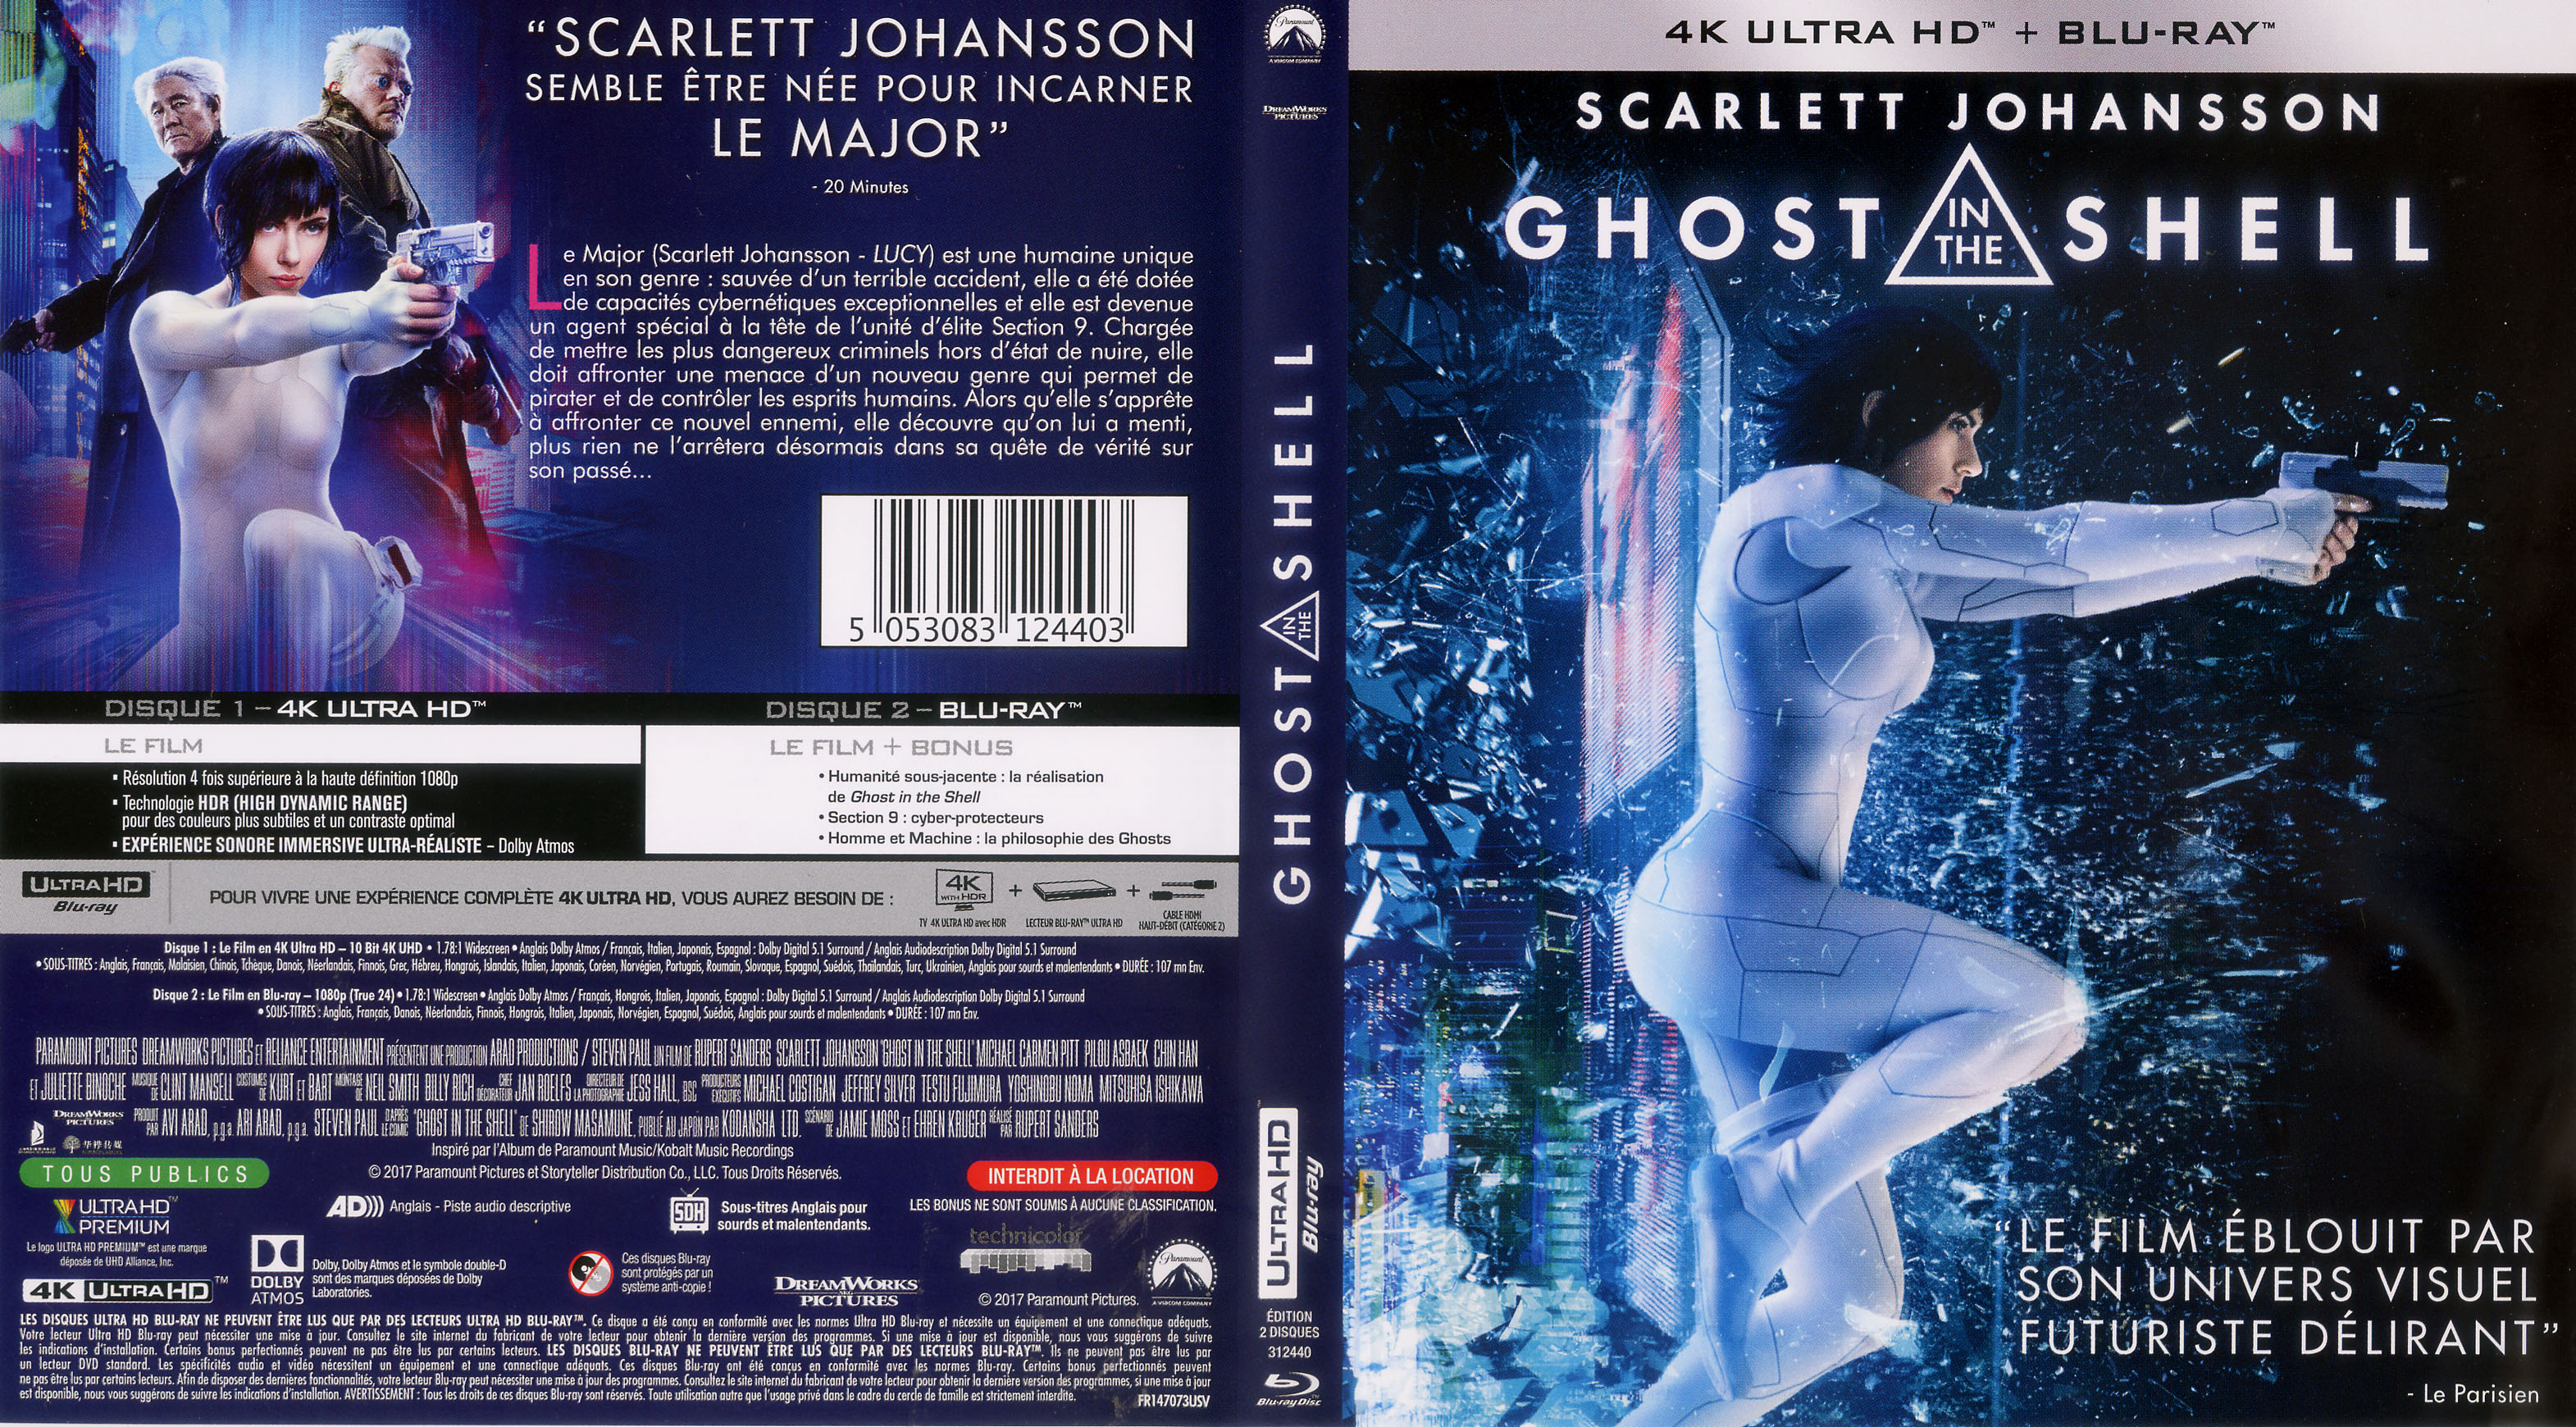 Jaquette DVD Ghost in the Shell (FILM) 4K (BLU-RAY)